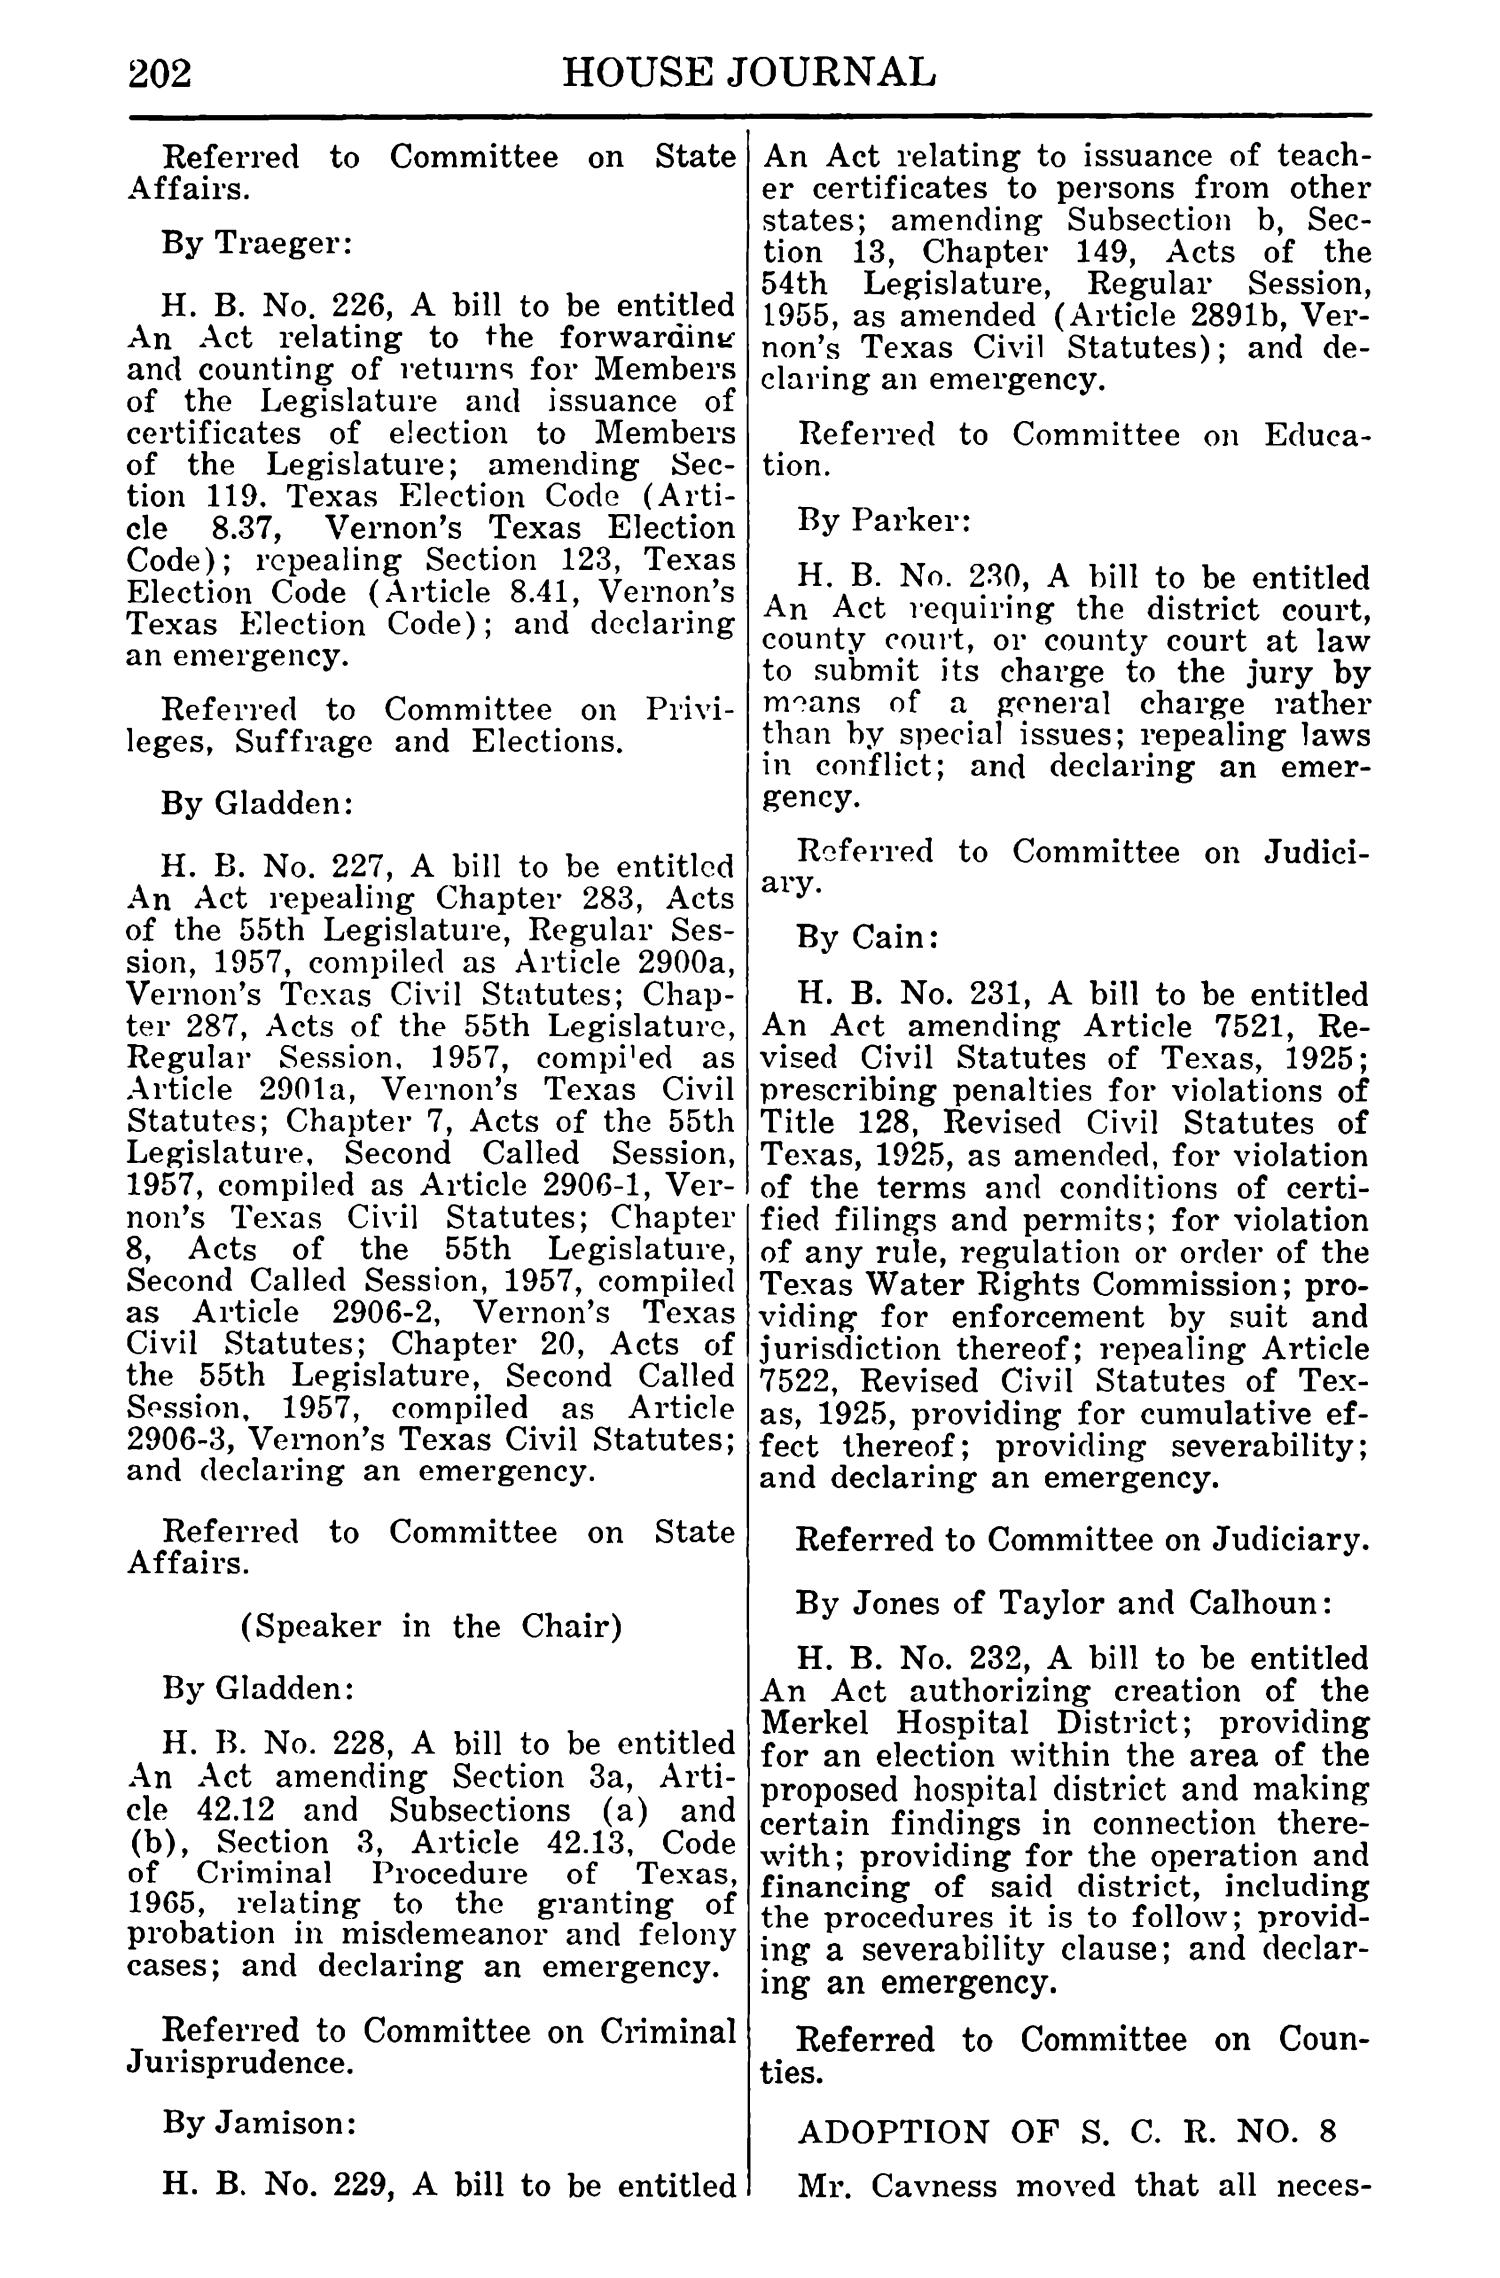 Journal of the House of Representatives of the Regular Session of the Sixtieth Legislature of the State of Texas, Volume 1
                                                
                                                    202
                                                